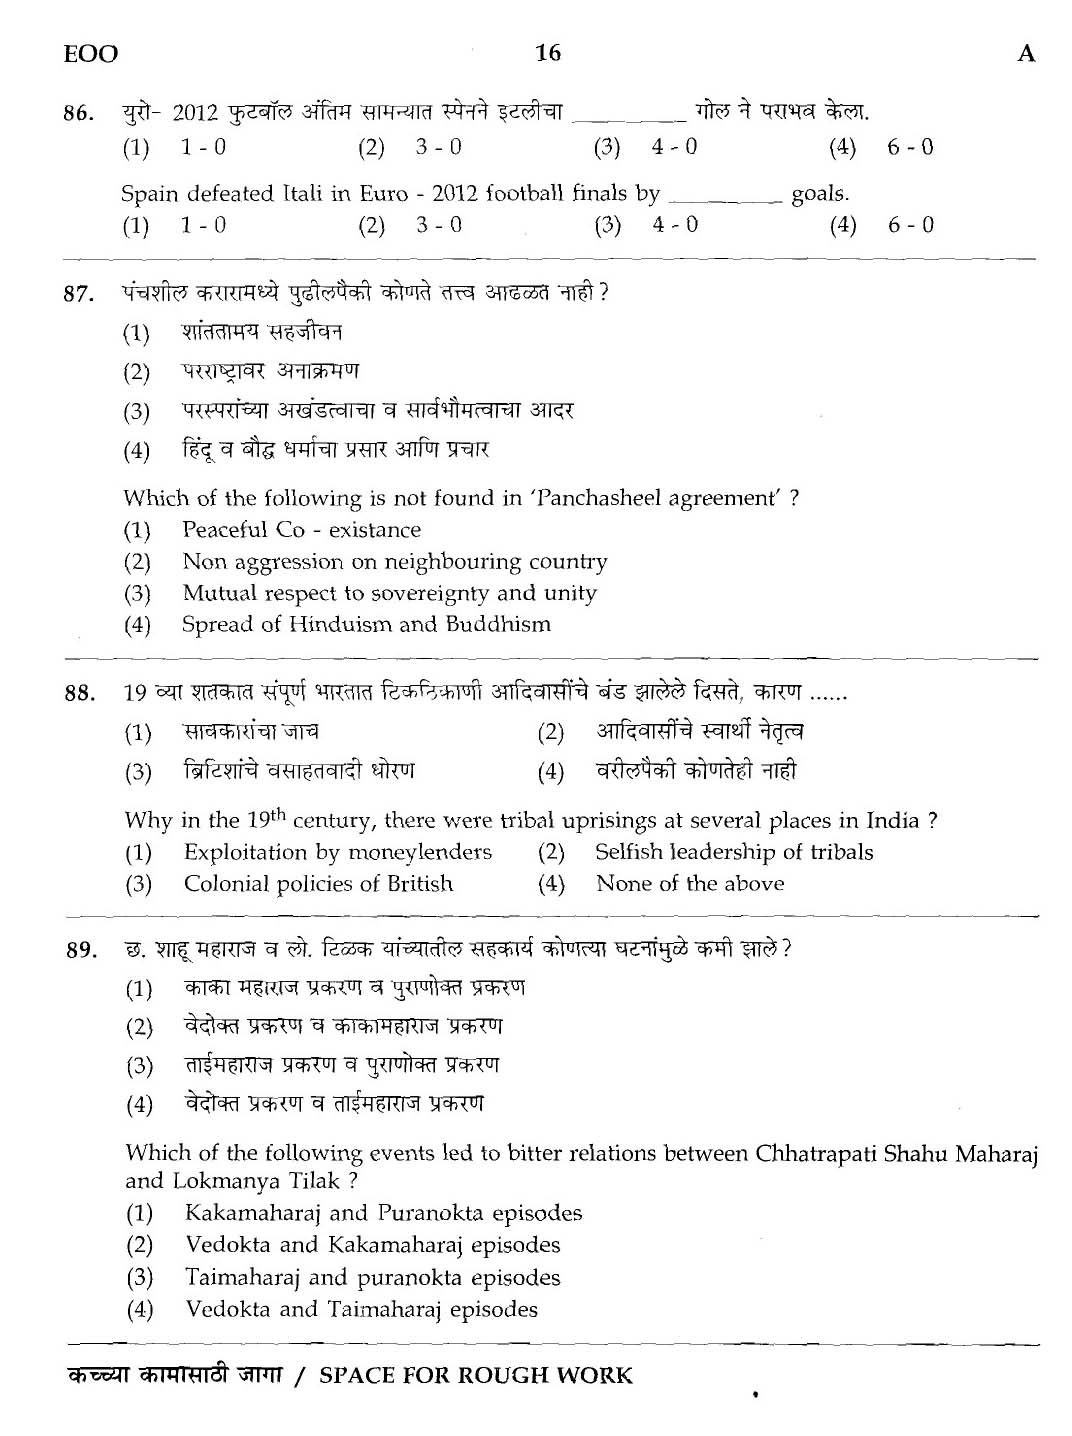 MPSC Agricultural Services Preliminary Exam 2012 Question Paper 15